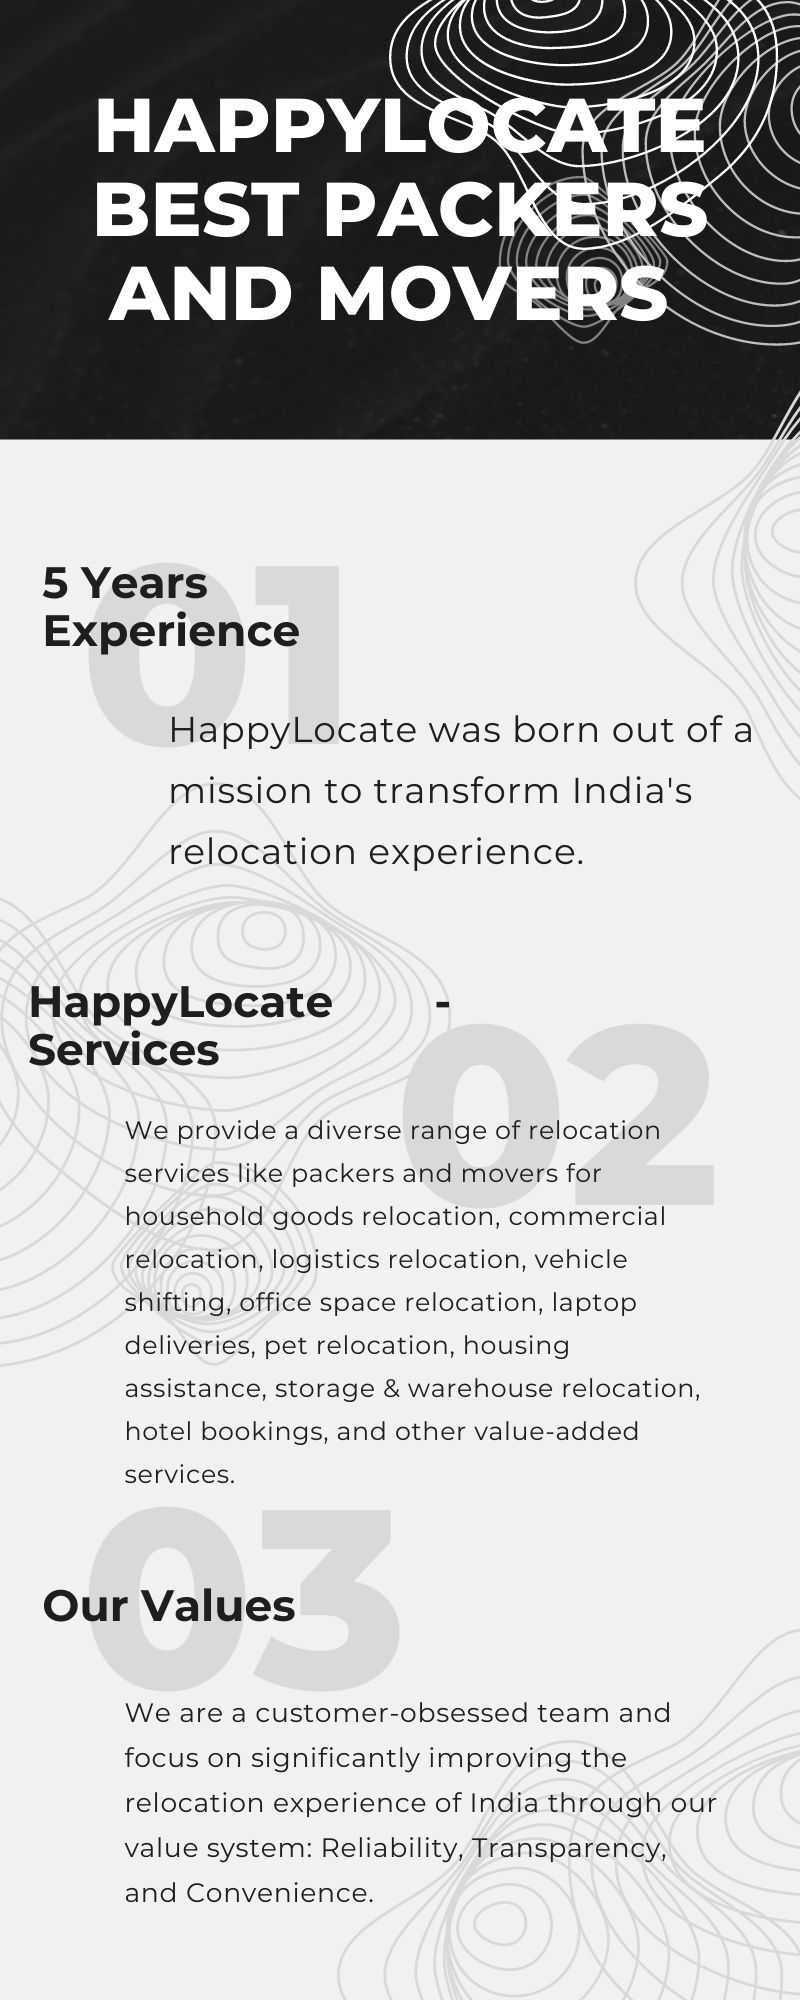 5 Years
Experience

HappylLocate was born out of a
mission to transform India's

relocation experience.

HappyLocate -
Services

We provide a diverse range of relocation
services like packers and movers for
household goods relocation, commercial
relocation, logistics relocation, vehicle
shifting, office space relocation, laptop
deliveries, pet relocation, housing
assistance, storage & warehouse relocation,
hotel bookings, and other value-added

services.

Our Values

We are a customer-obsessed team and
focus on significantly improving the
relocation experience of India through our
value system: Reliability, Transparency,

and Convenience